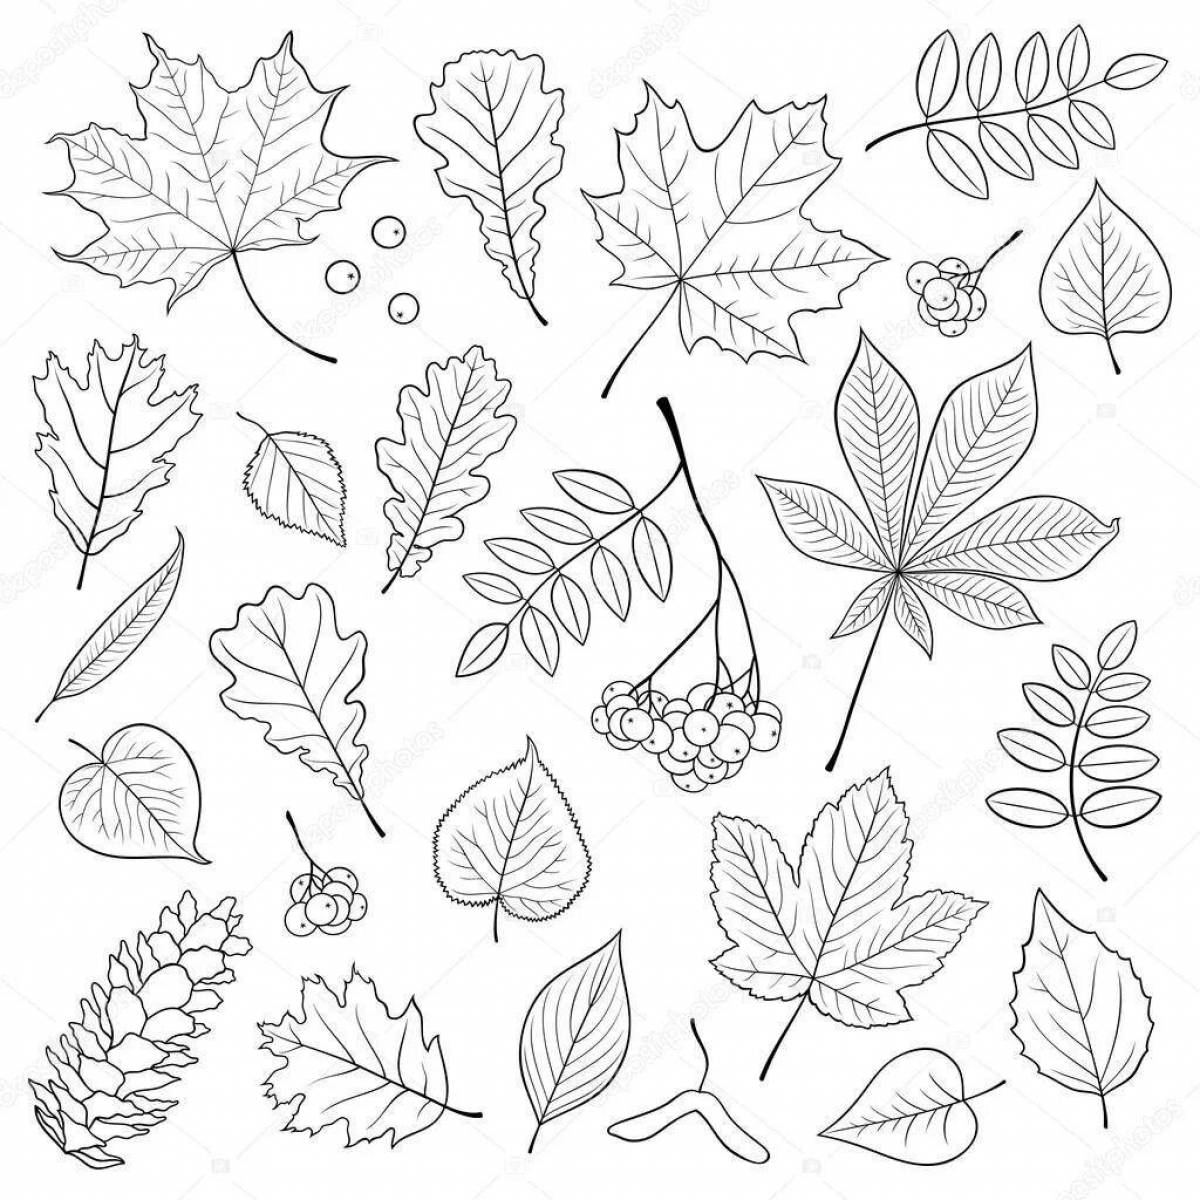 Great coloring page with lots of leaves